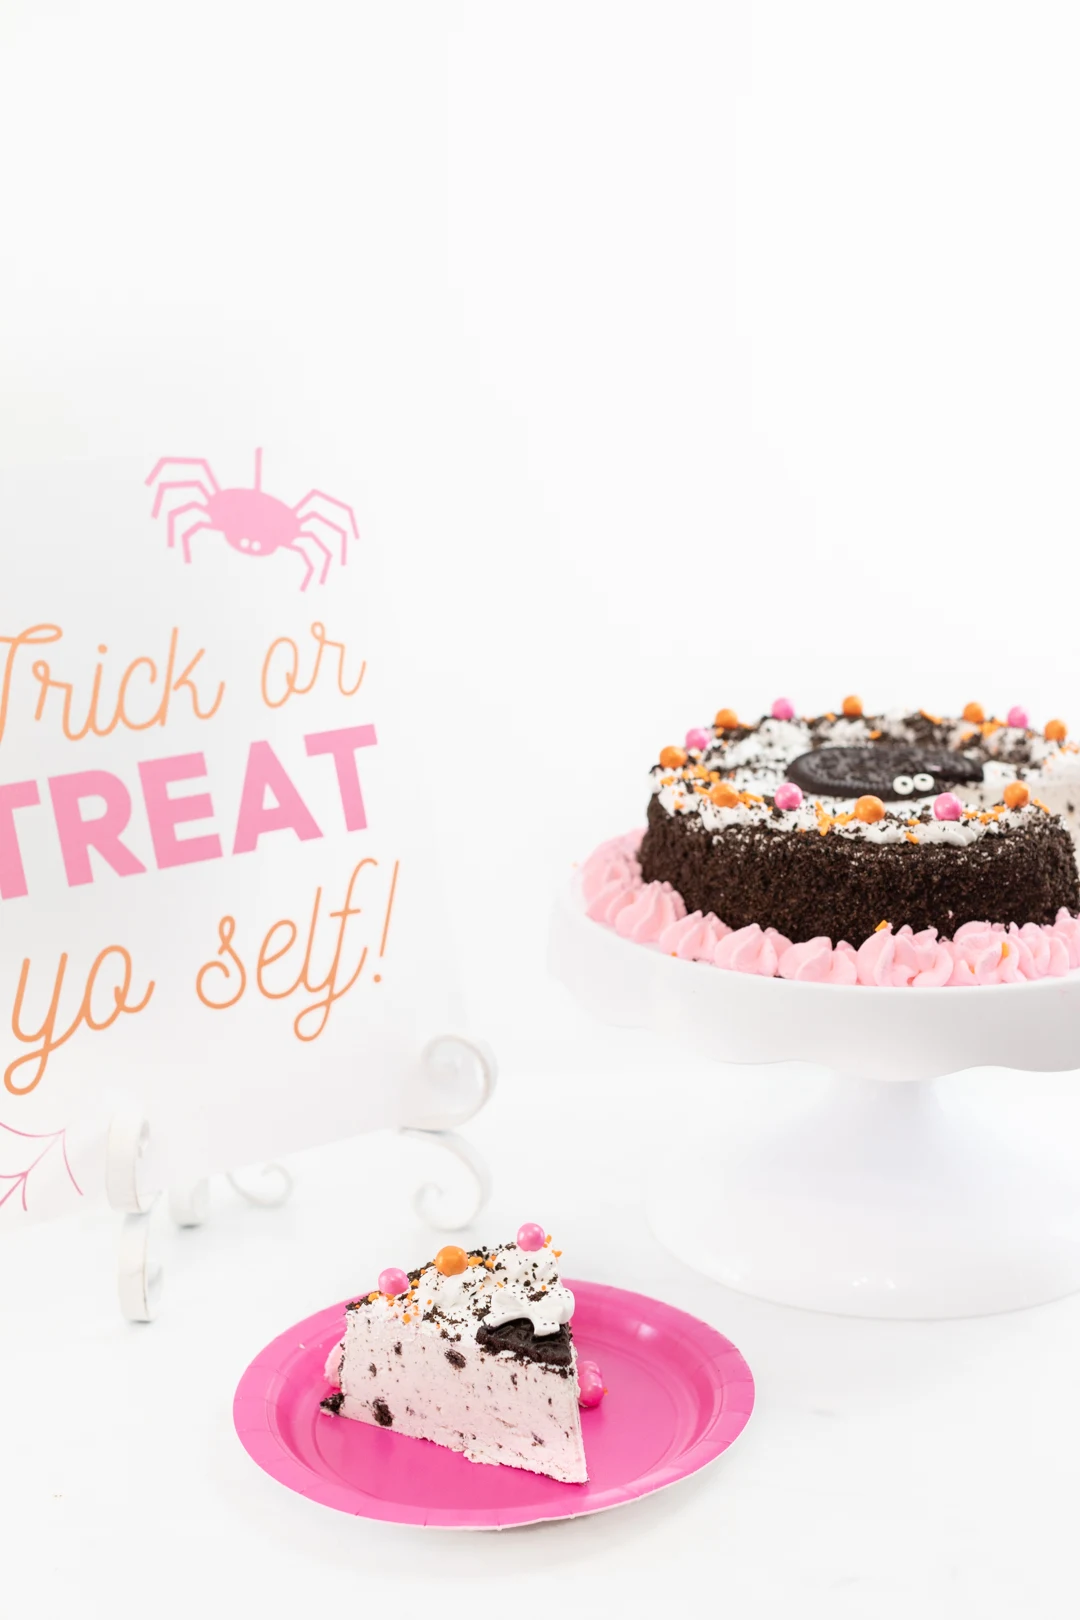 Delish OREO Premium Ice Cream Cake Embellished with pretty pink details for Halloween.